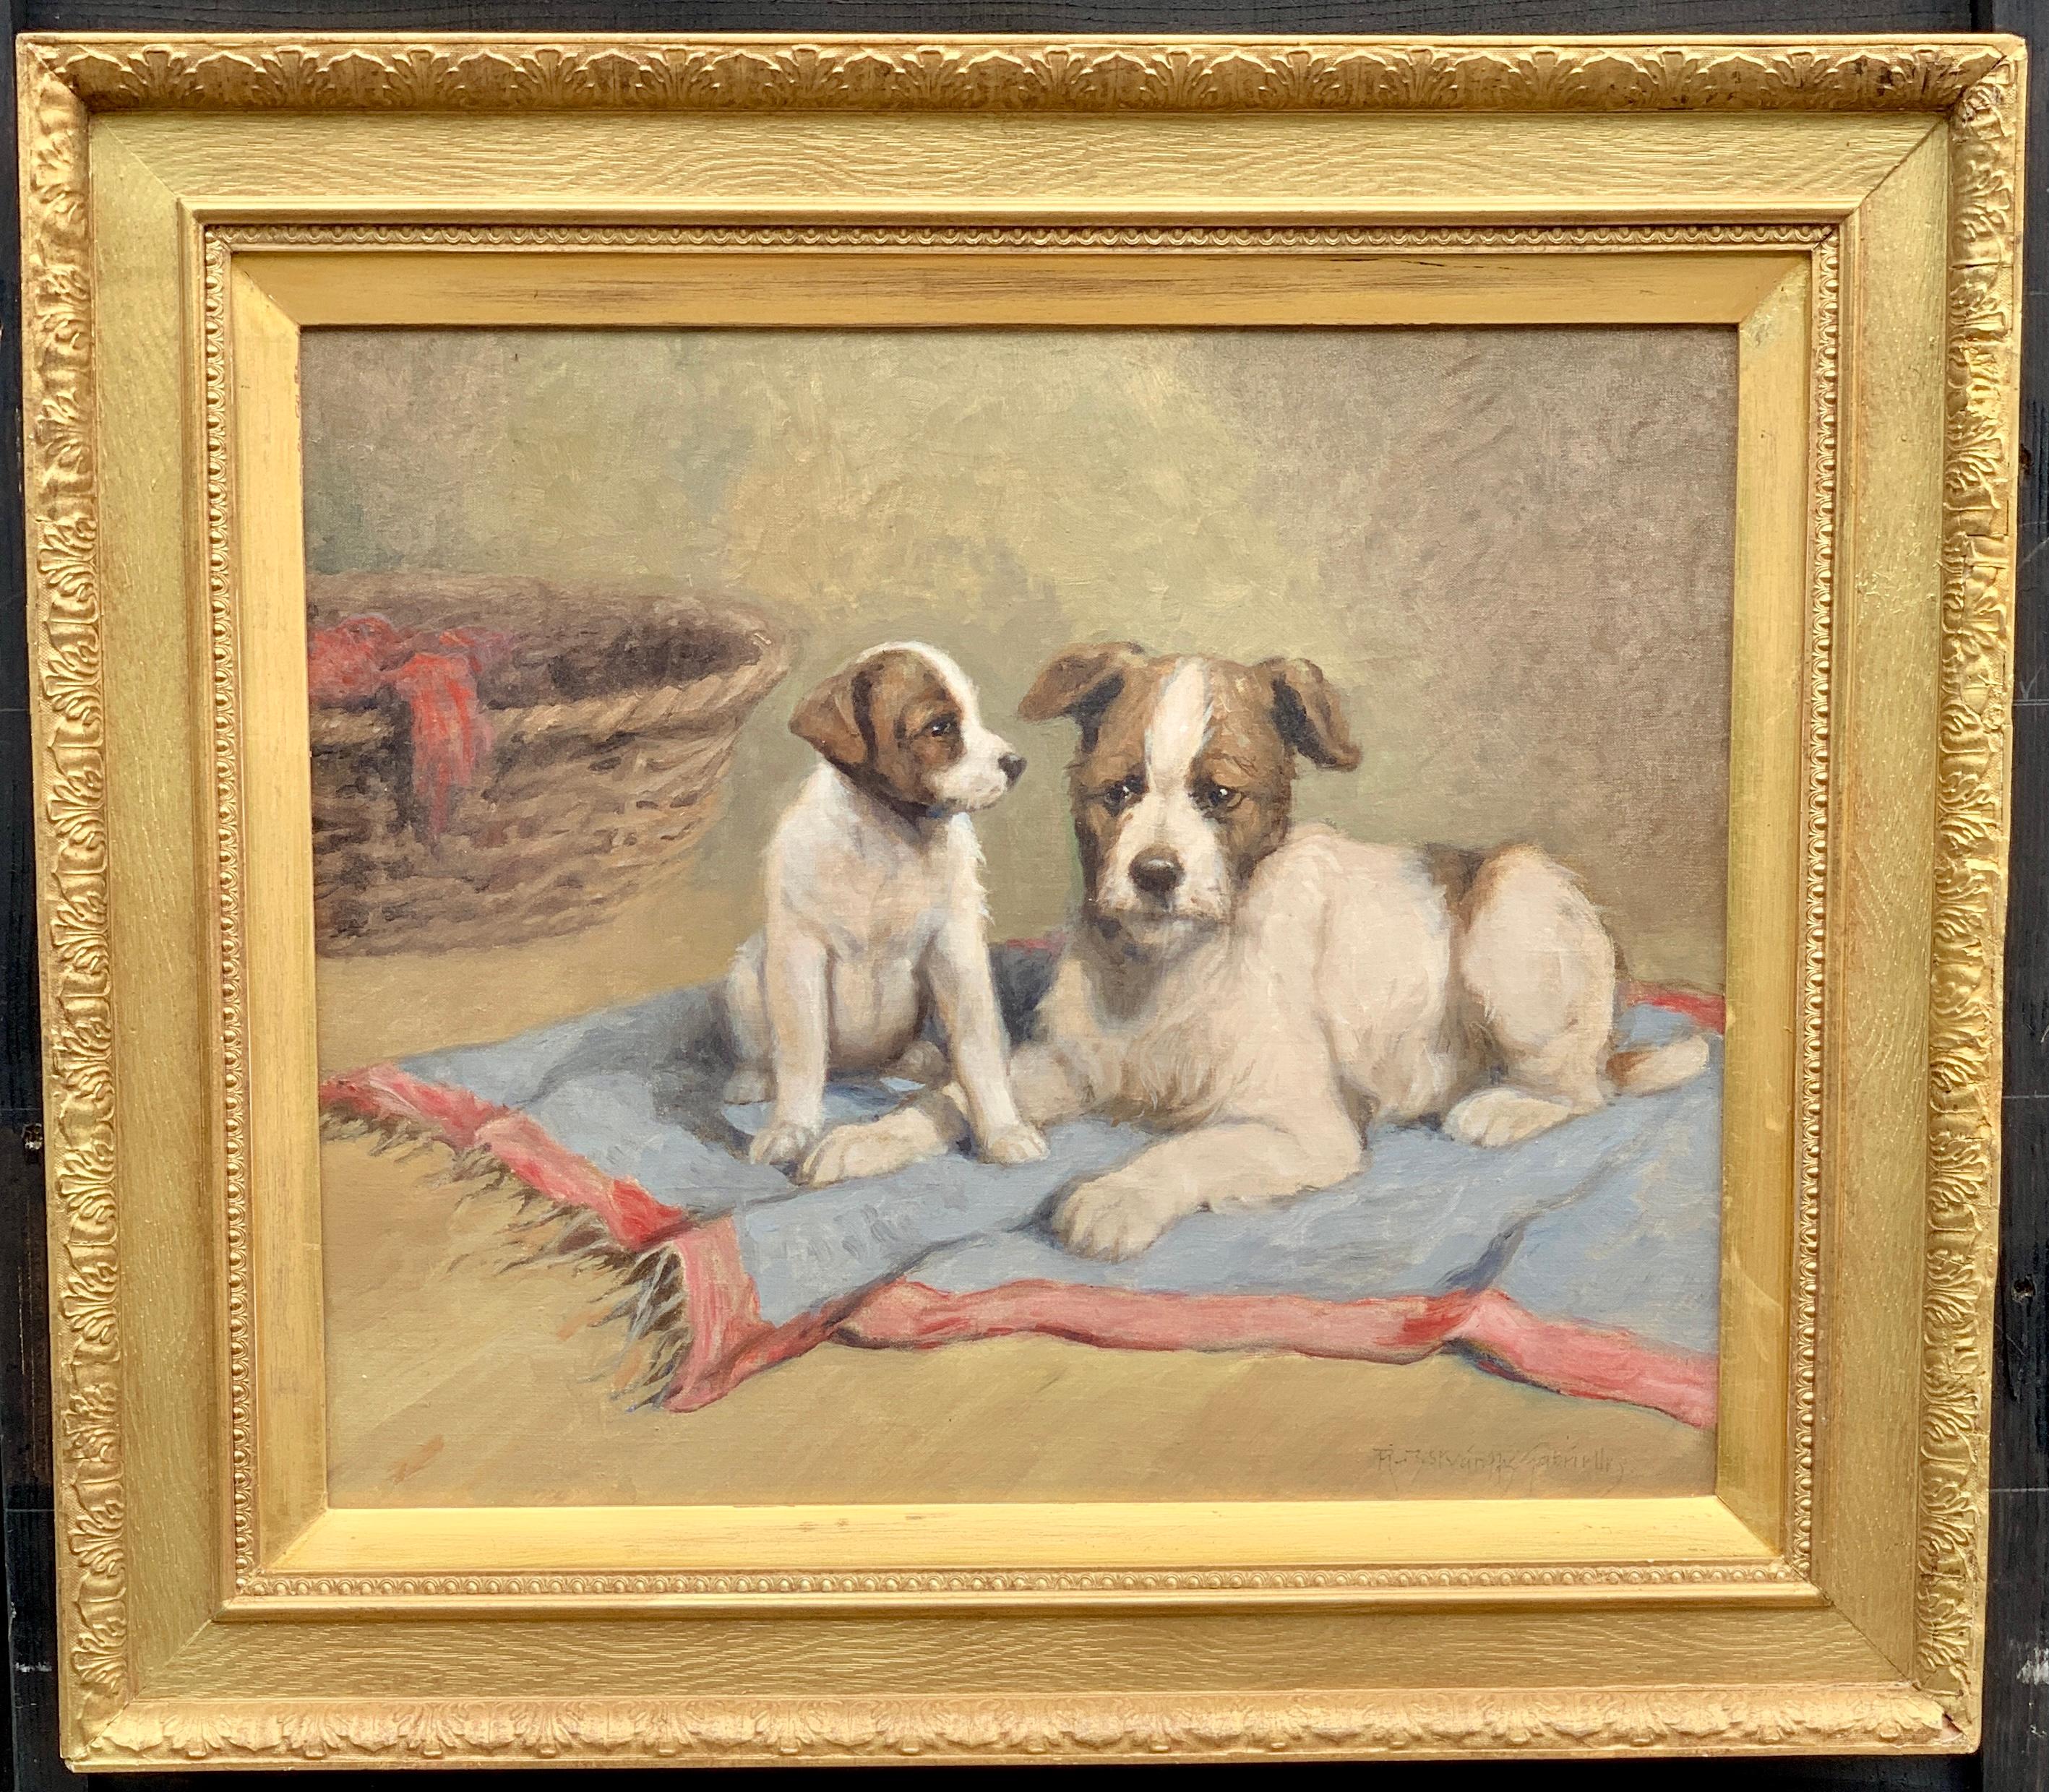 Early 20th century Hungarian portrait of a terrier dog and her puppy in oils